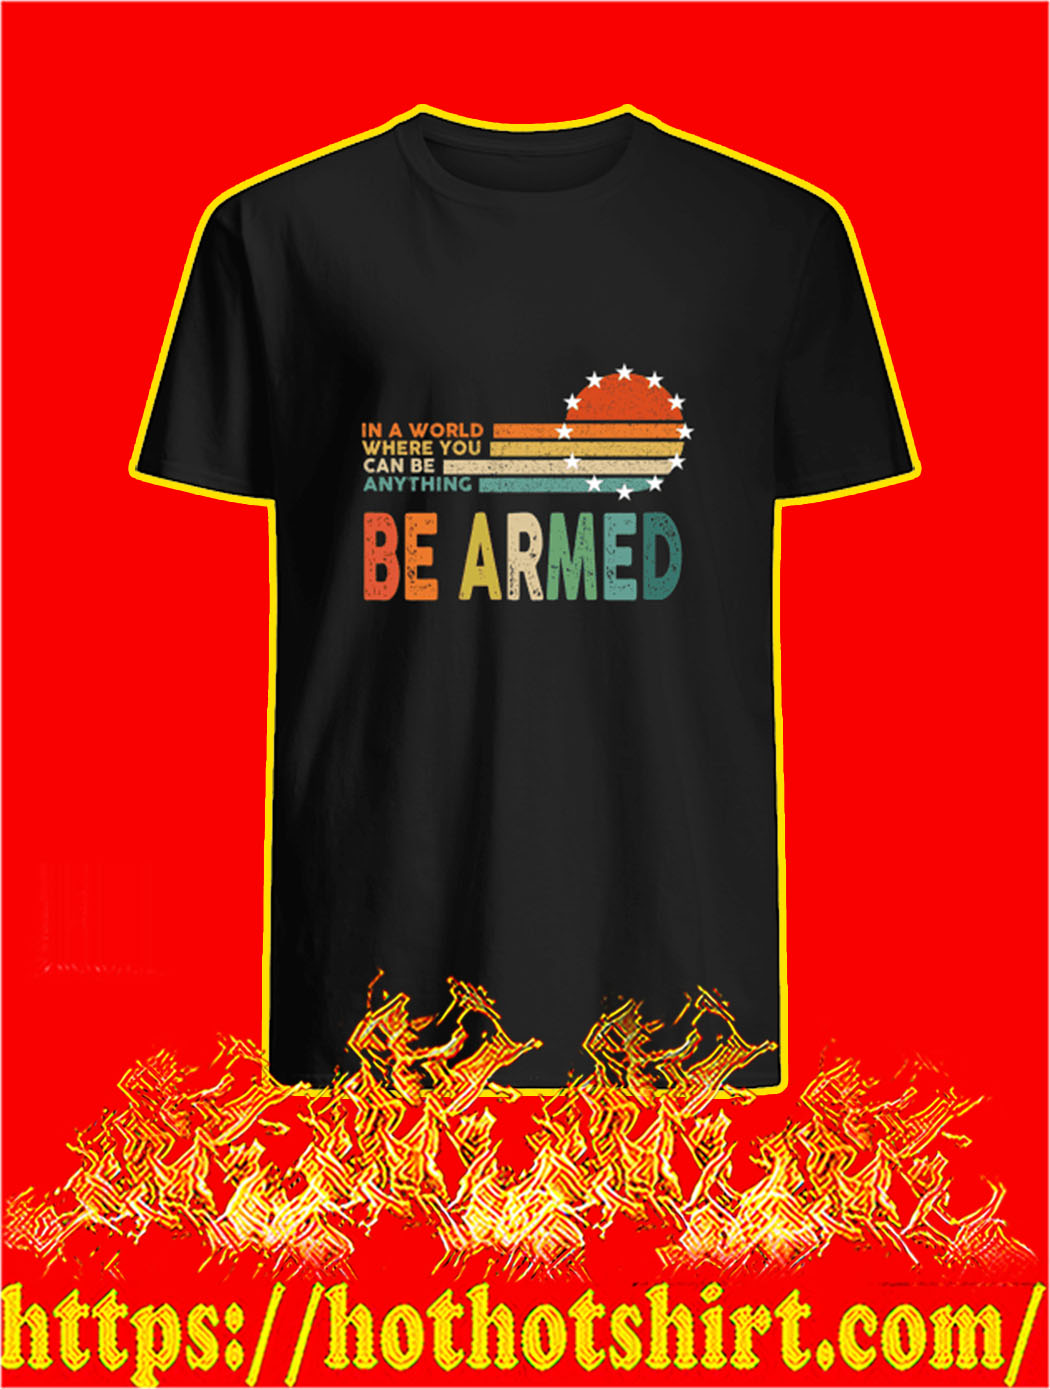 In A World Where You Can Be Anything Be Armed shirt, tank top and sweatshirt